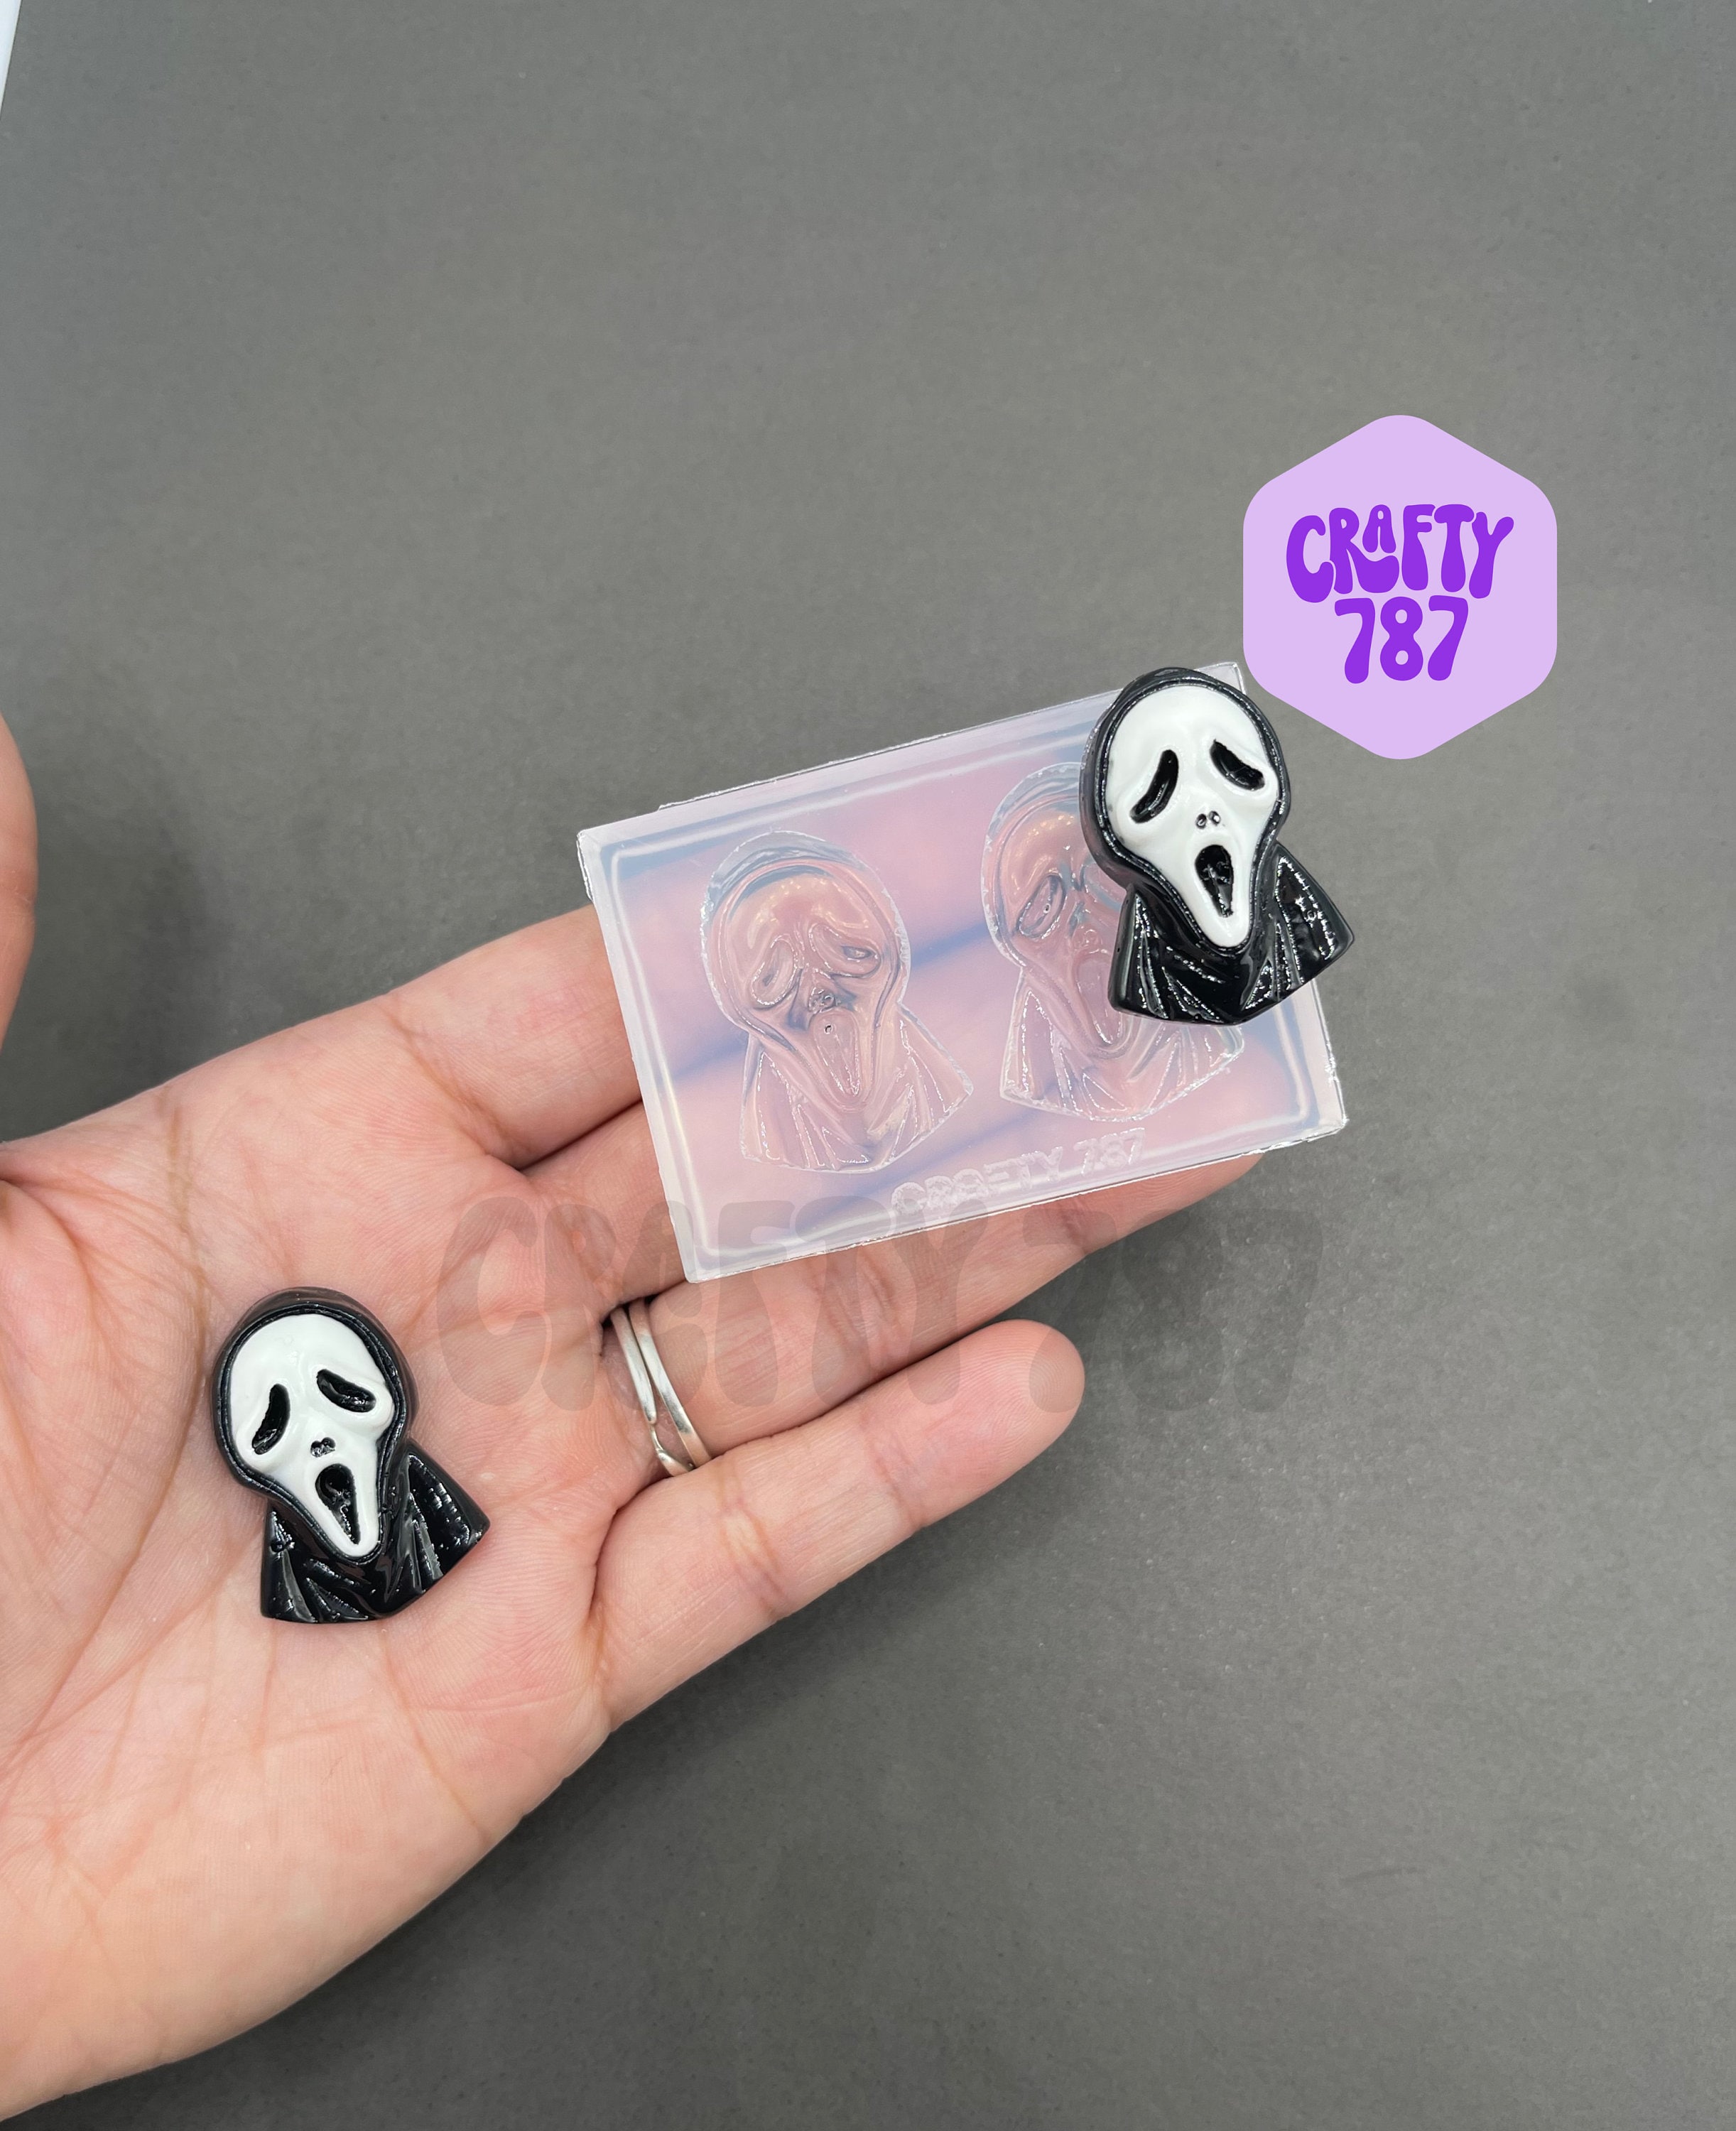 Halloween Silicone earrings mold for resin and epoxy Pumpkin